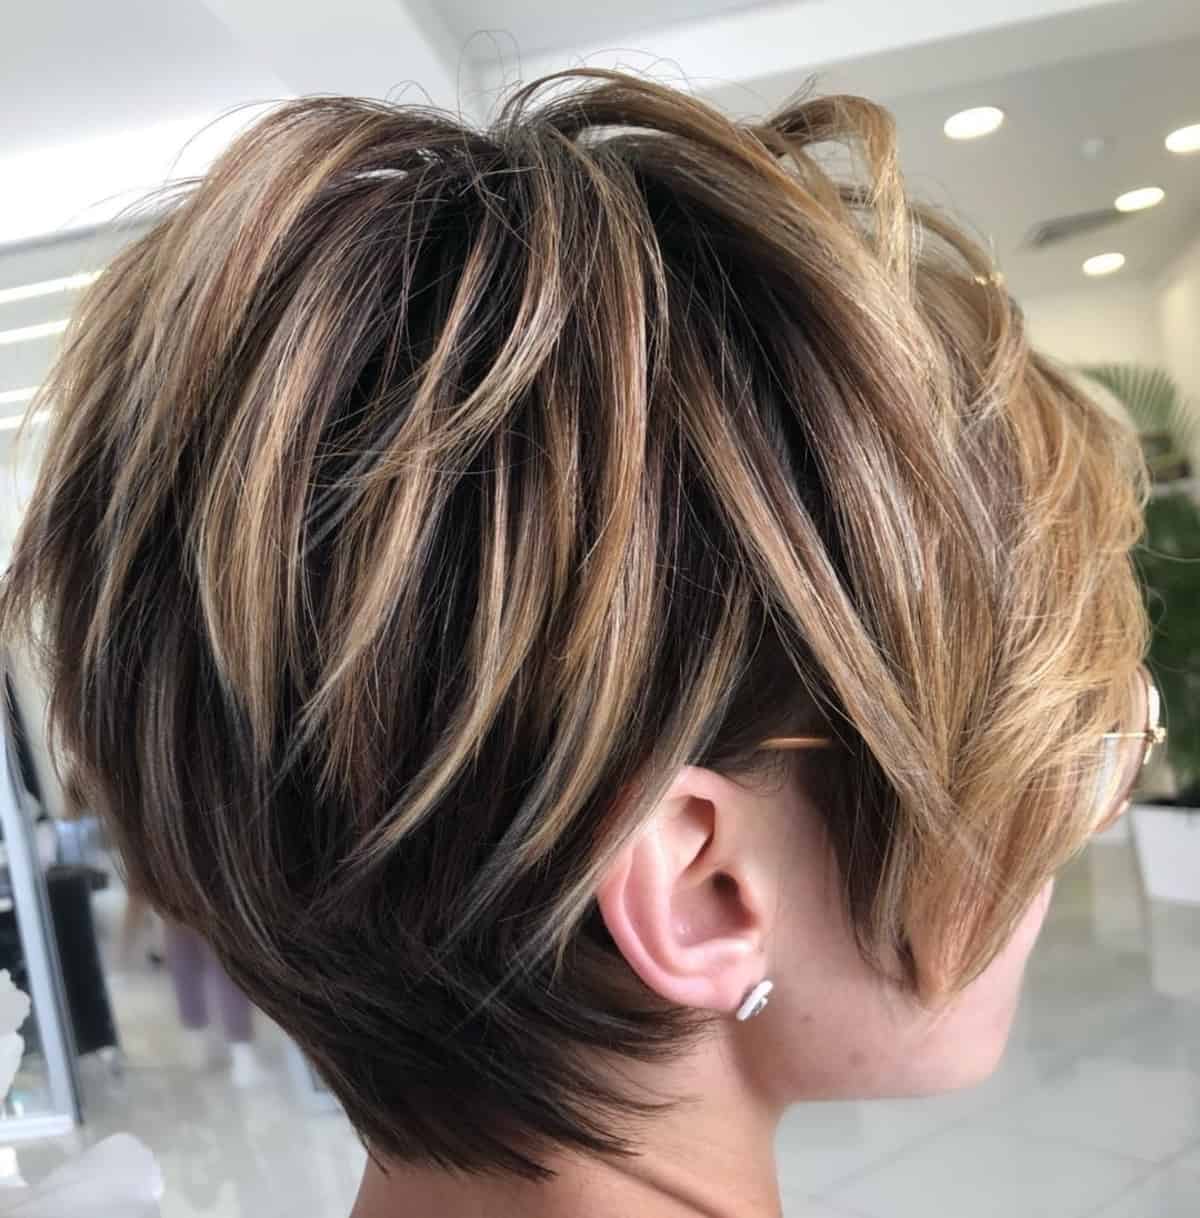 Textured Pixie Bob Hairstyle for Women